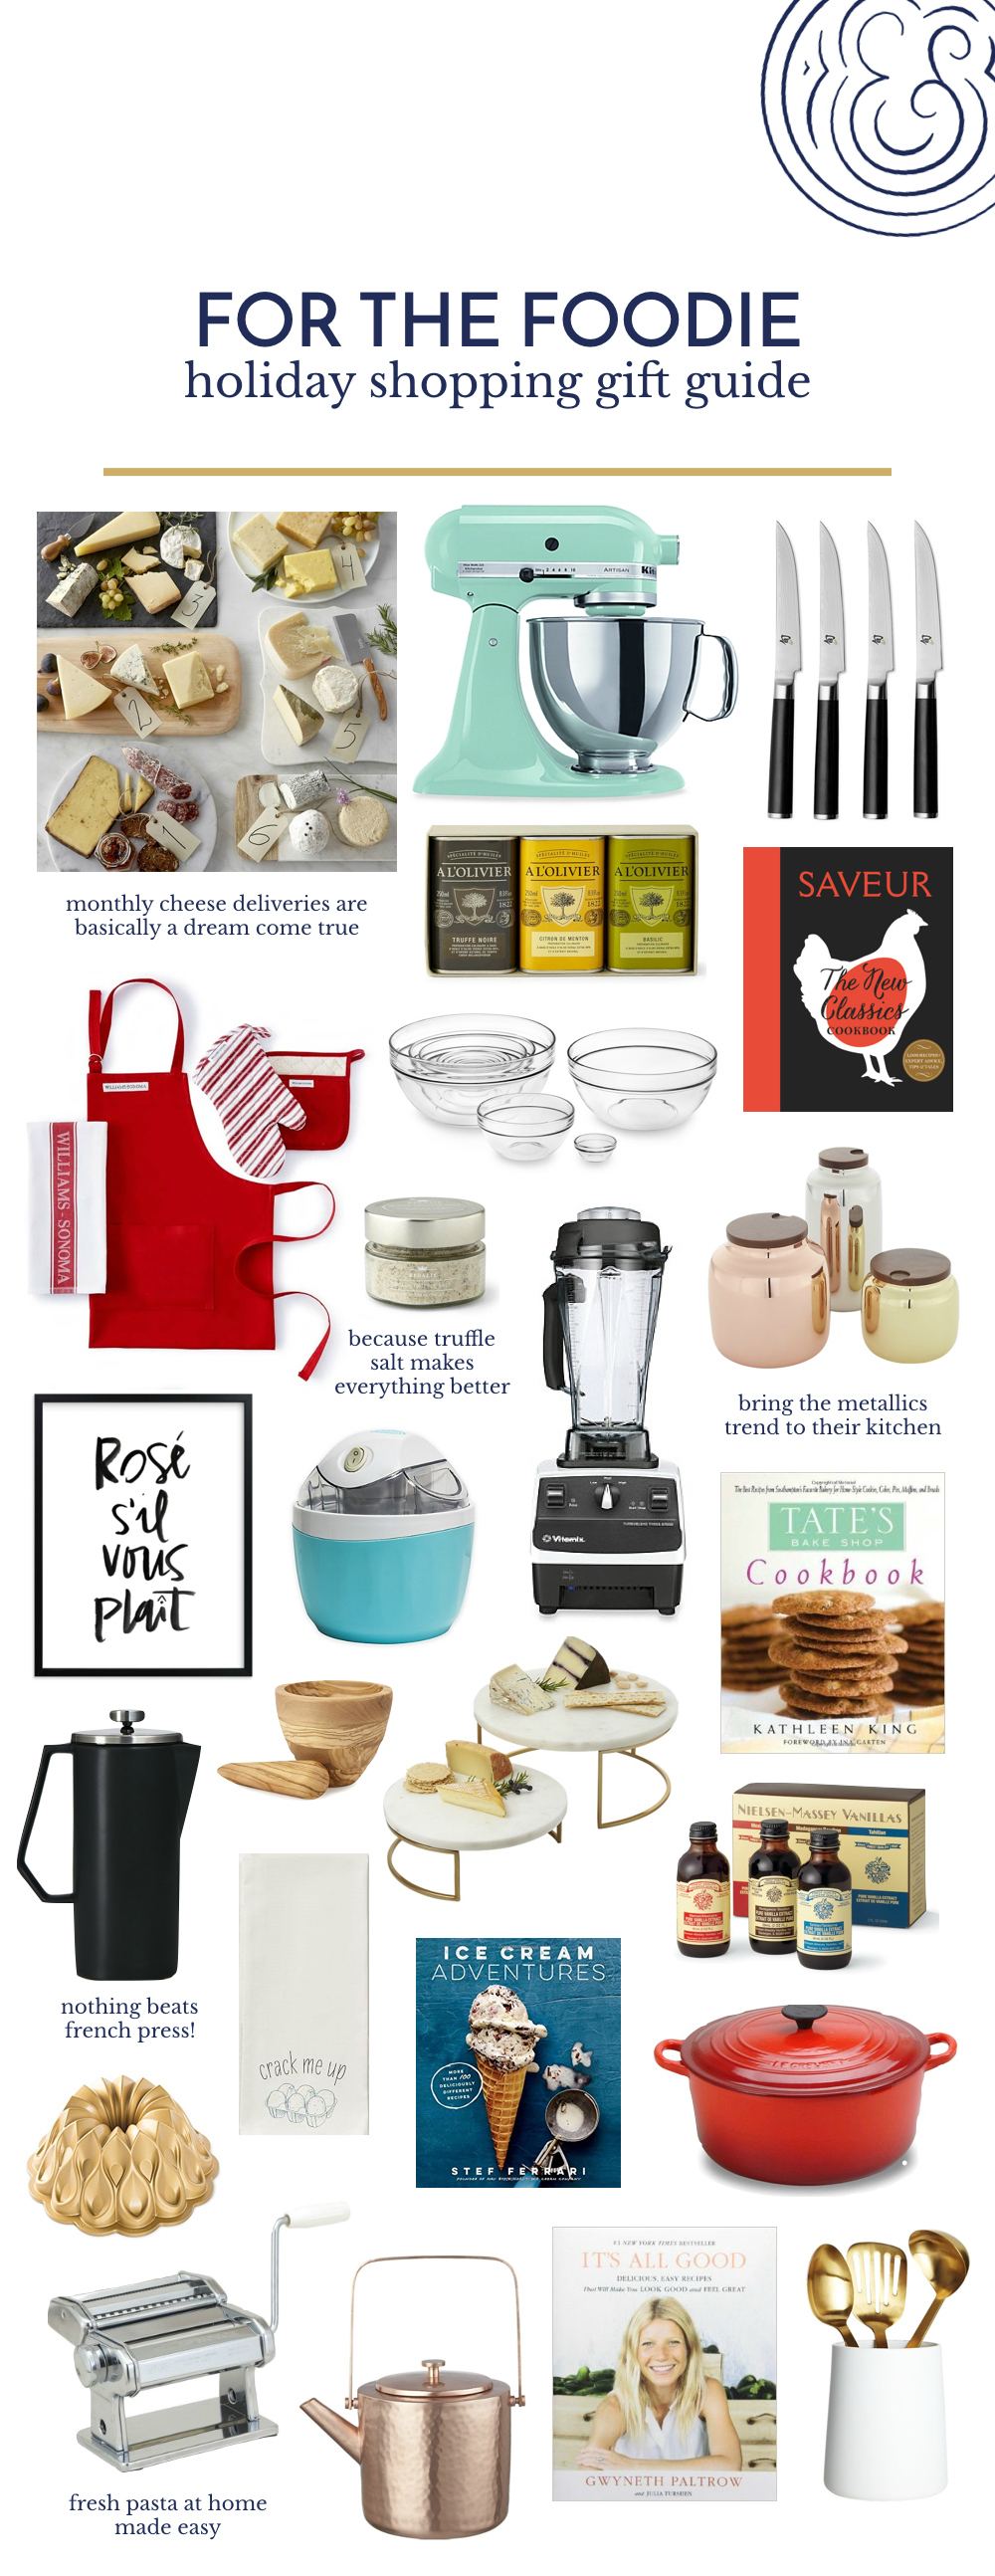 The Best Holiday Gift Ideas for the Foodie.